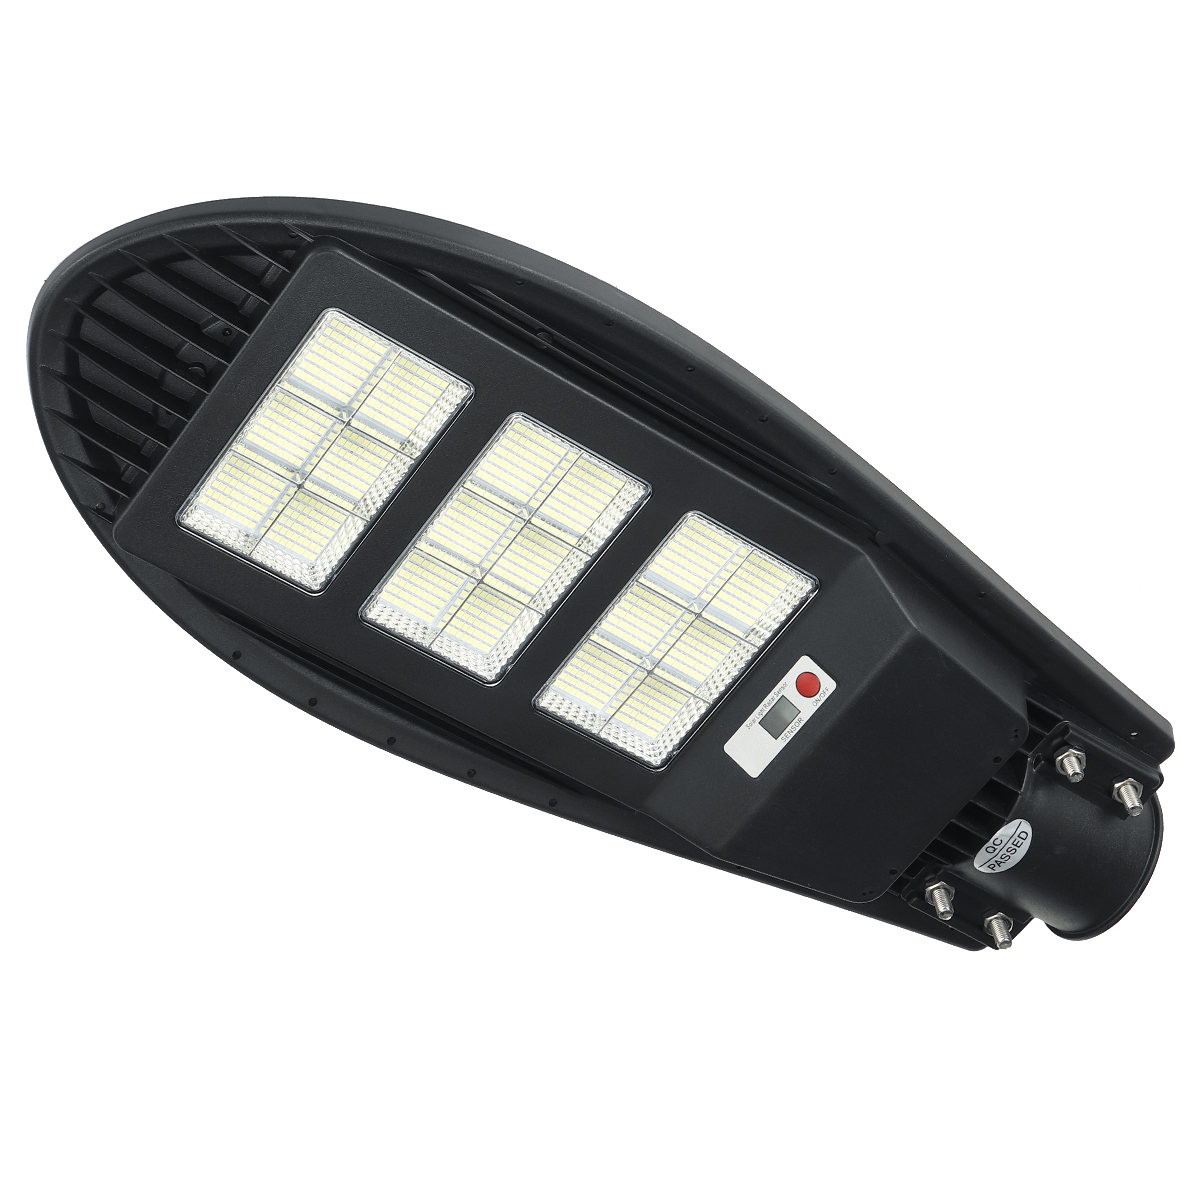 Find 756/1138/1512LED Solar Street Light Motion Sensor Outdoor Garden Area Road Spotlight IP65 for Sale on Gipsybee.com with cryptocurrencies